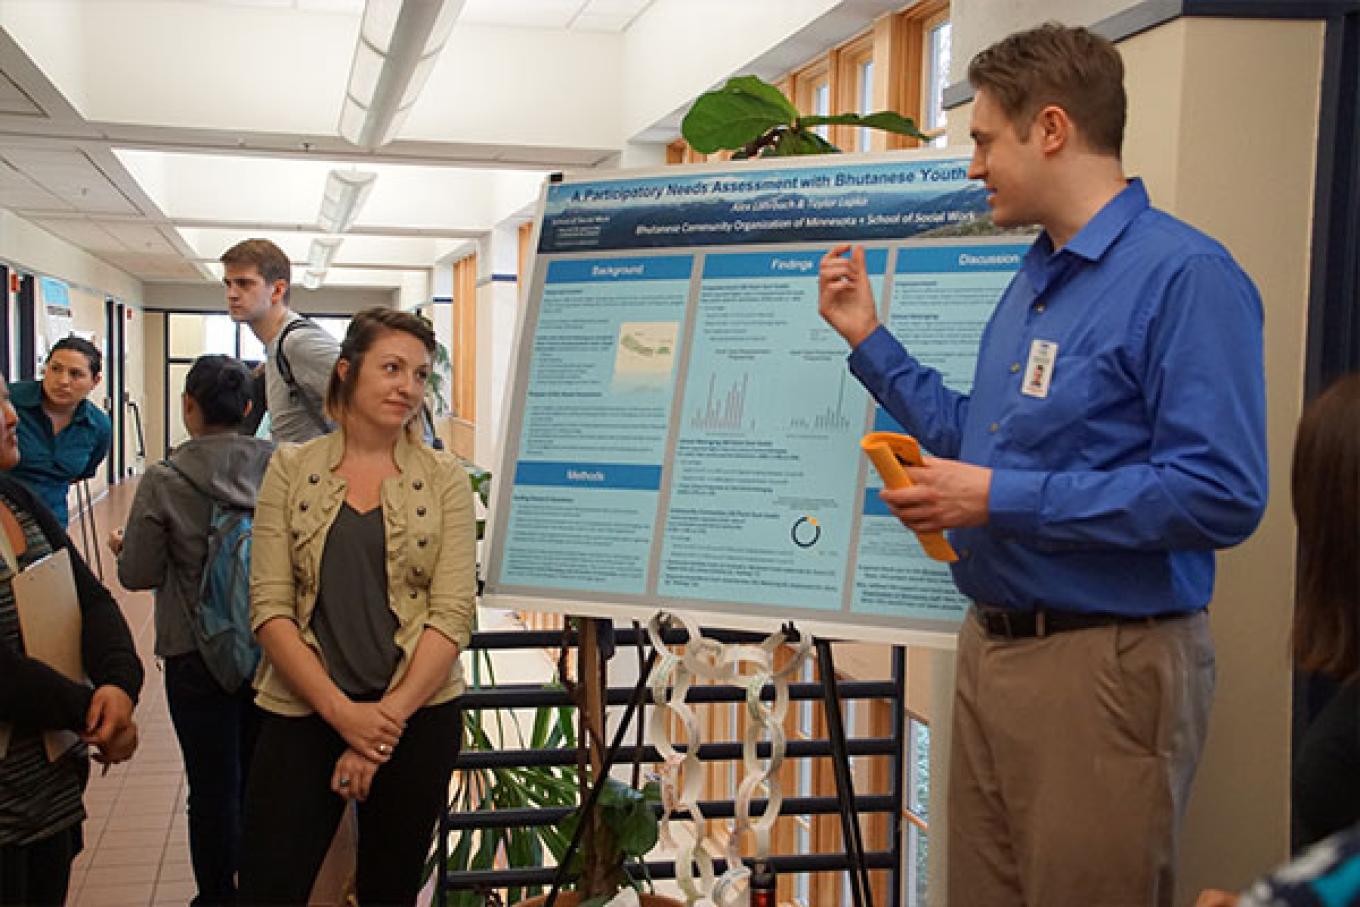 MSW students Alex and Taylor explained their project for advanced social work evaluation.